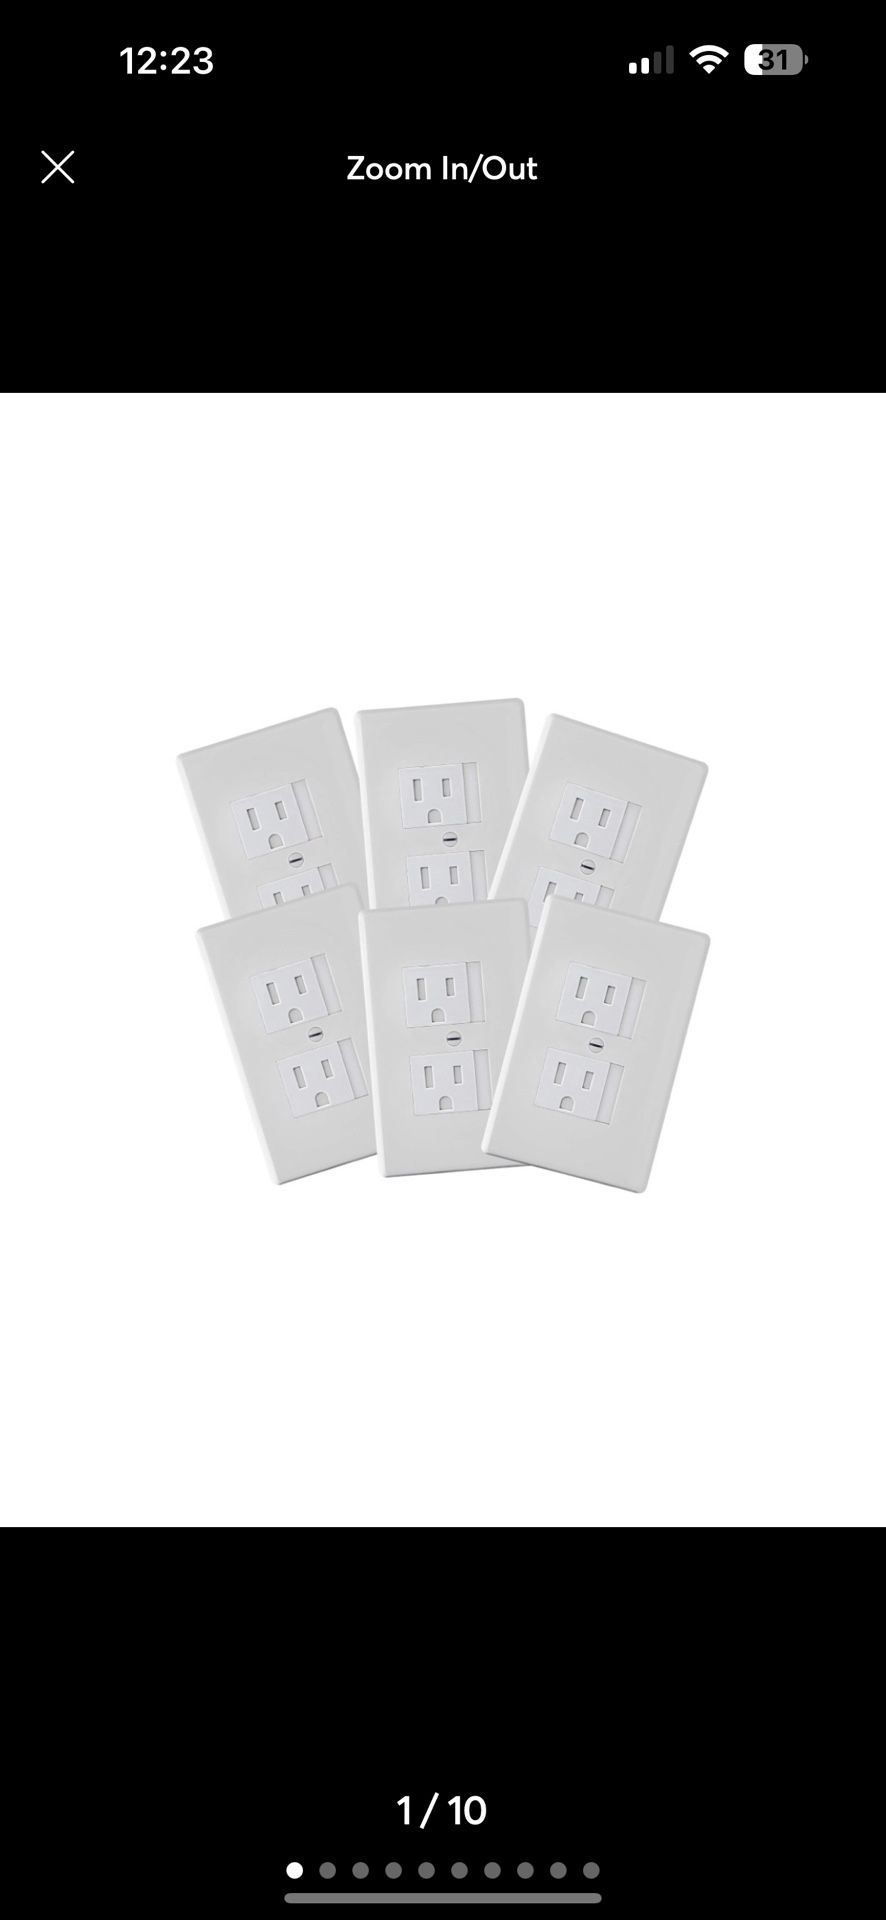 6-Pack Safety Innovations Self-Closing Outlet Covers (For Center Screw Outlets)